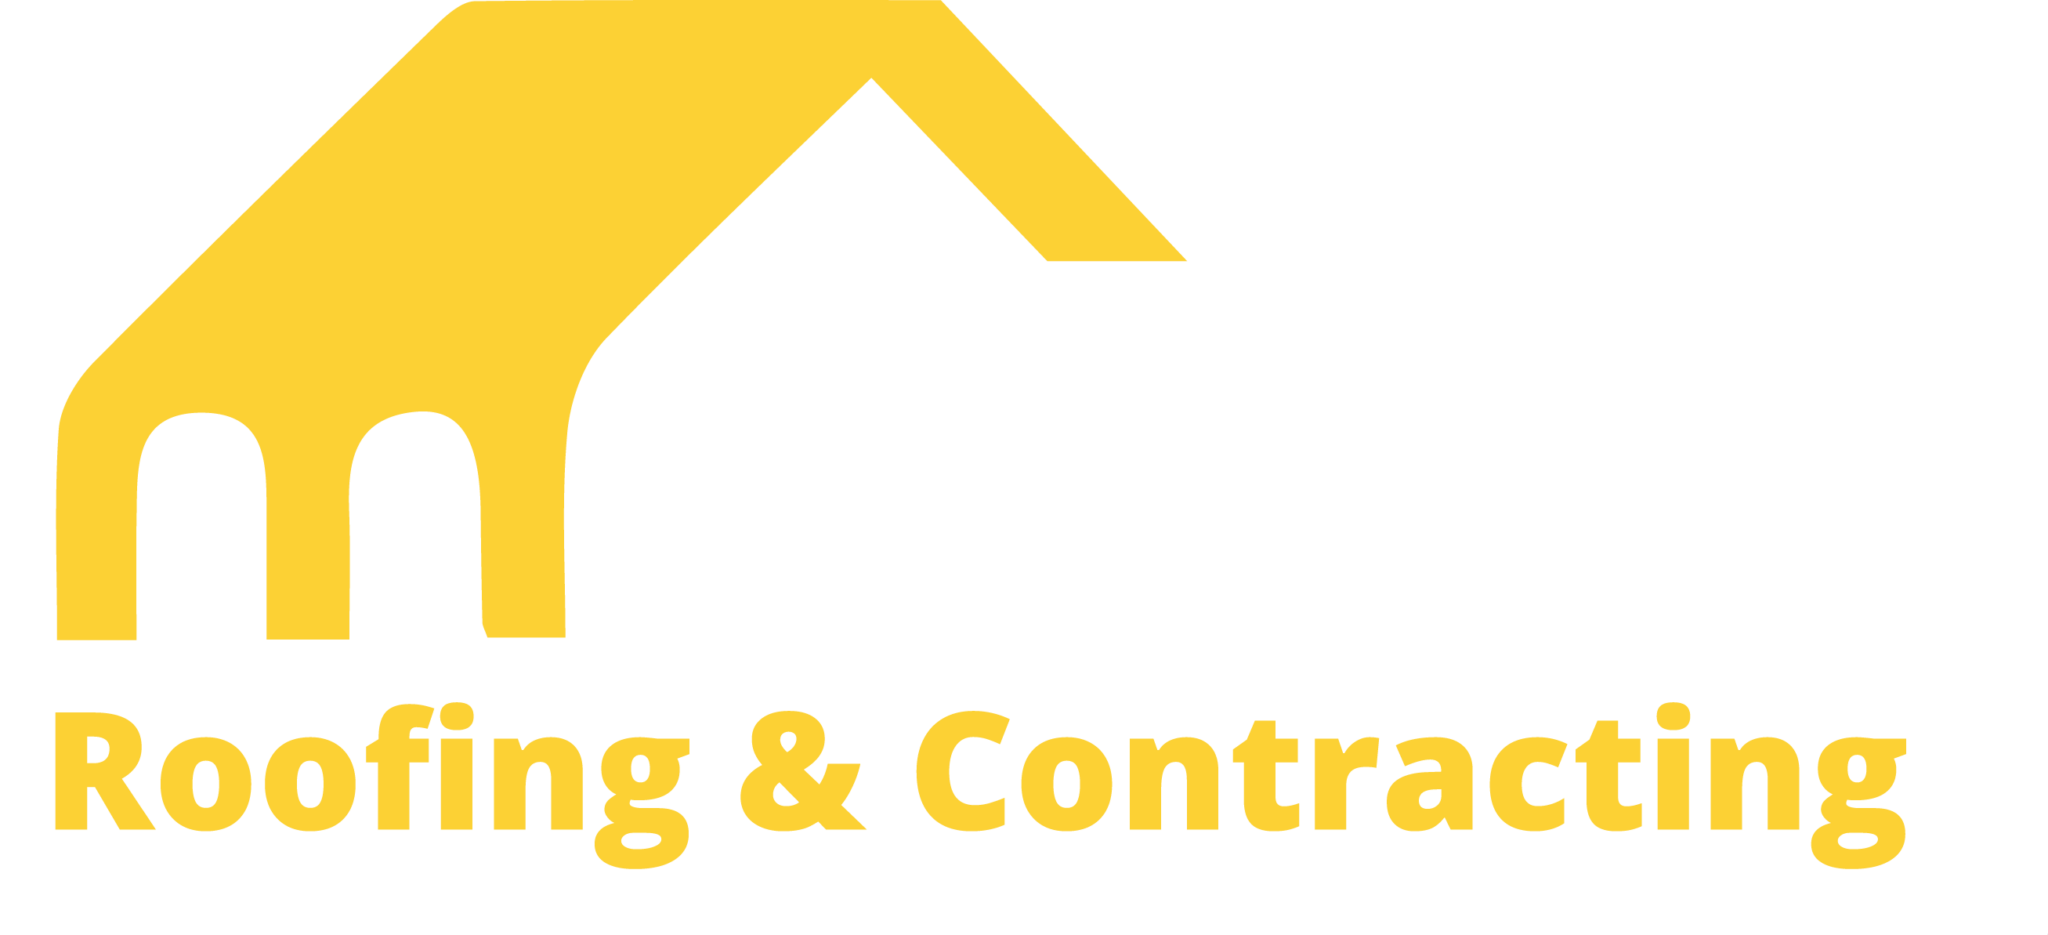 Montclair Roofing and Contracting Highlights Flexible Financing Options for New Roof Installations